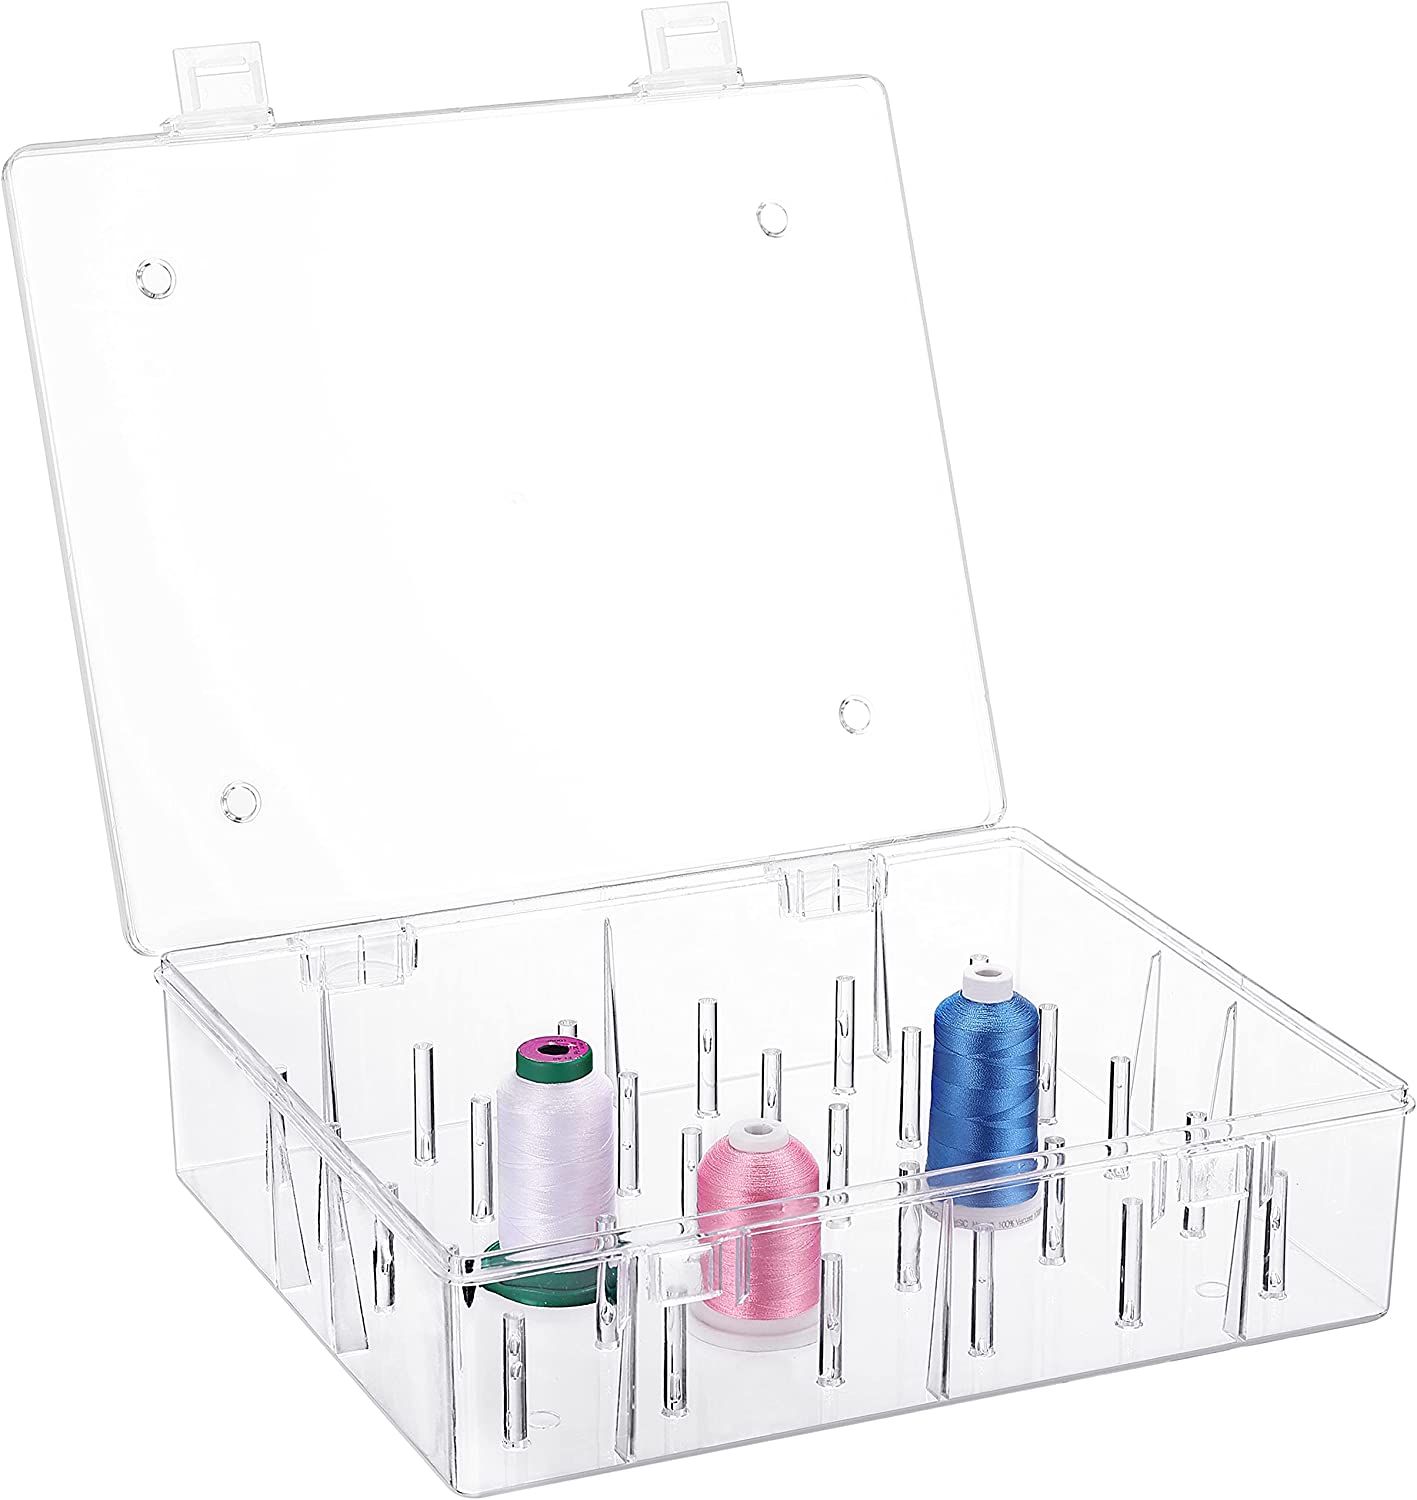 New brothread Tall and Clear Storage Box/Organizer for Holding 30 Spools  Home Embroidery & Cotton Thread Spool Compatible with Tall Thread Spool  from